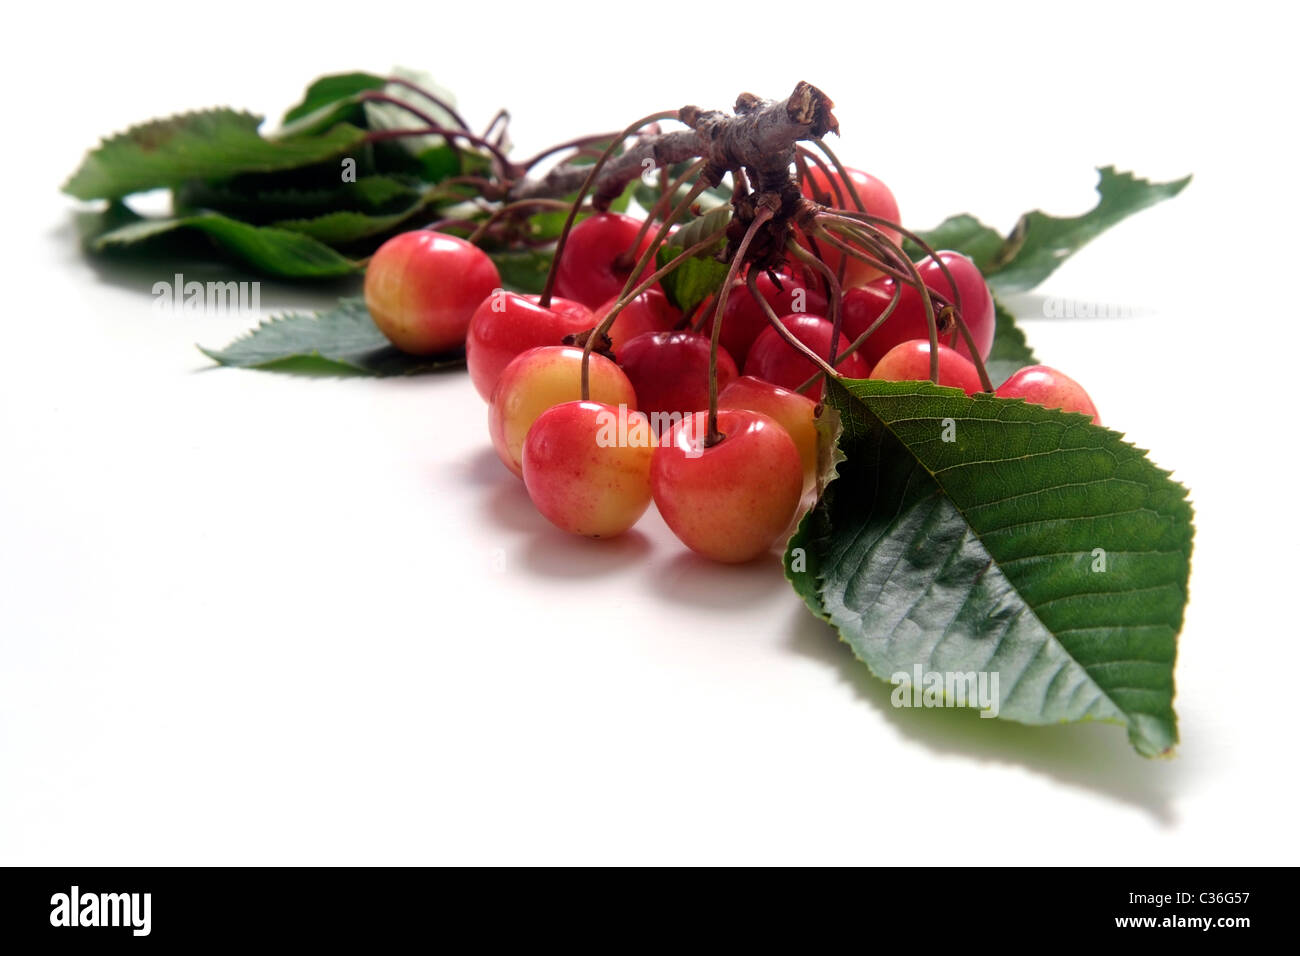 Cherry variety Altenburger Knorpelkirsche  with twig and leaves Stock Photo